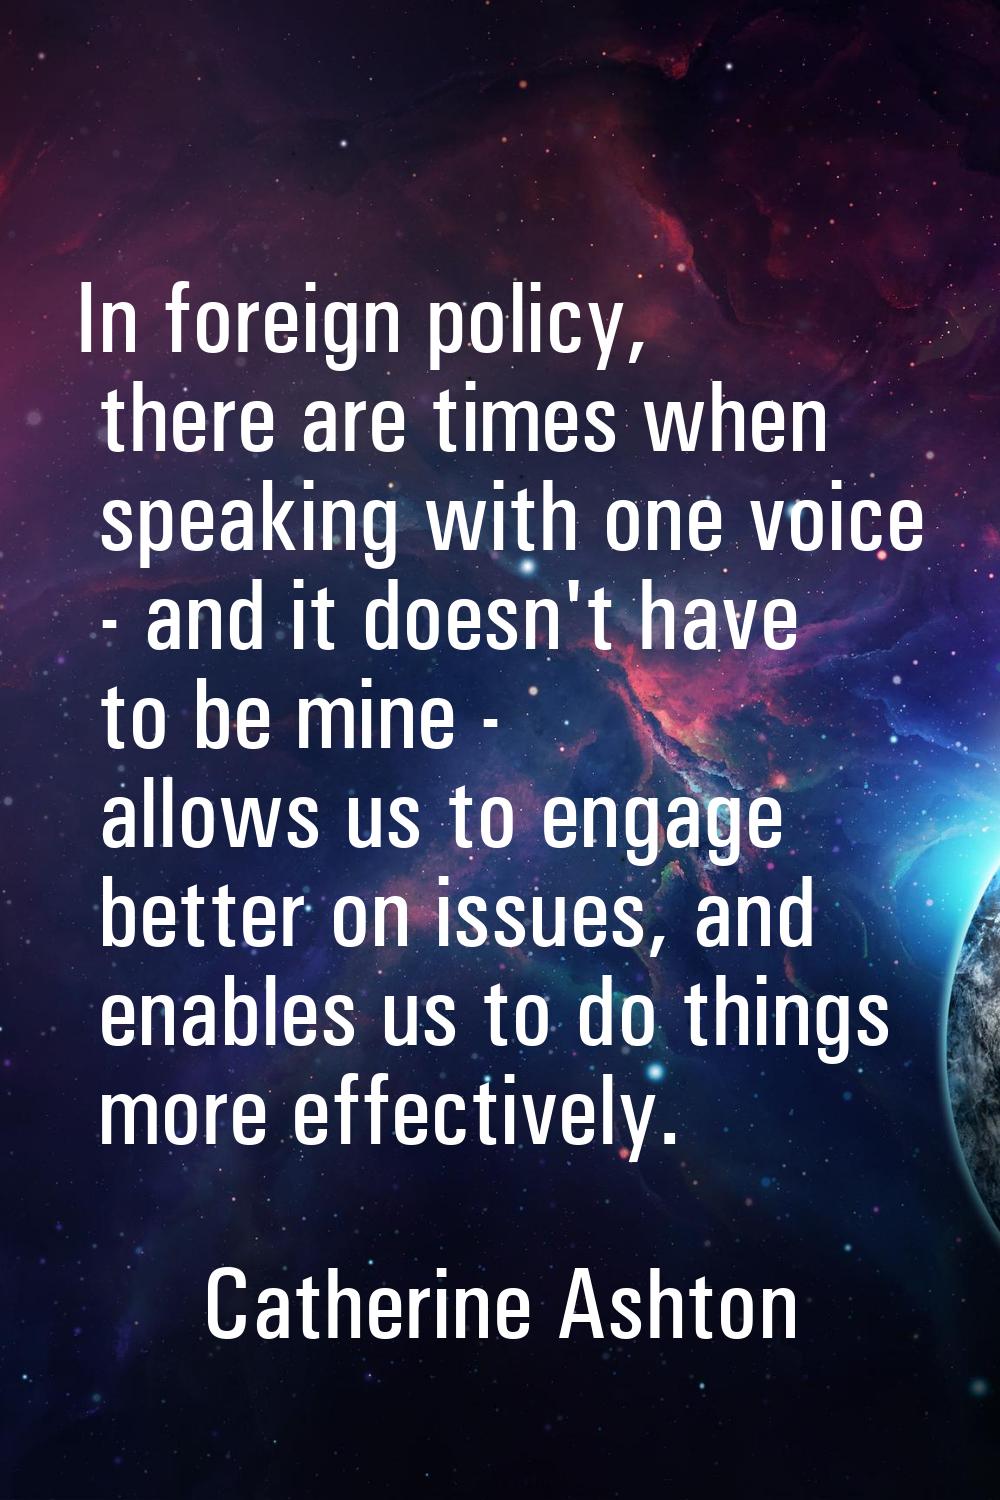 In foreign policy, there are times when speaking with one voice - and it doesn't have to be mine - 